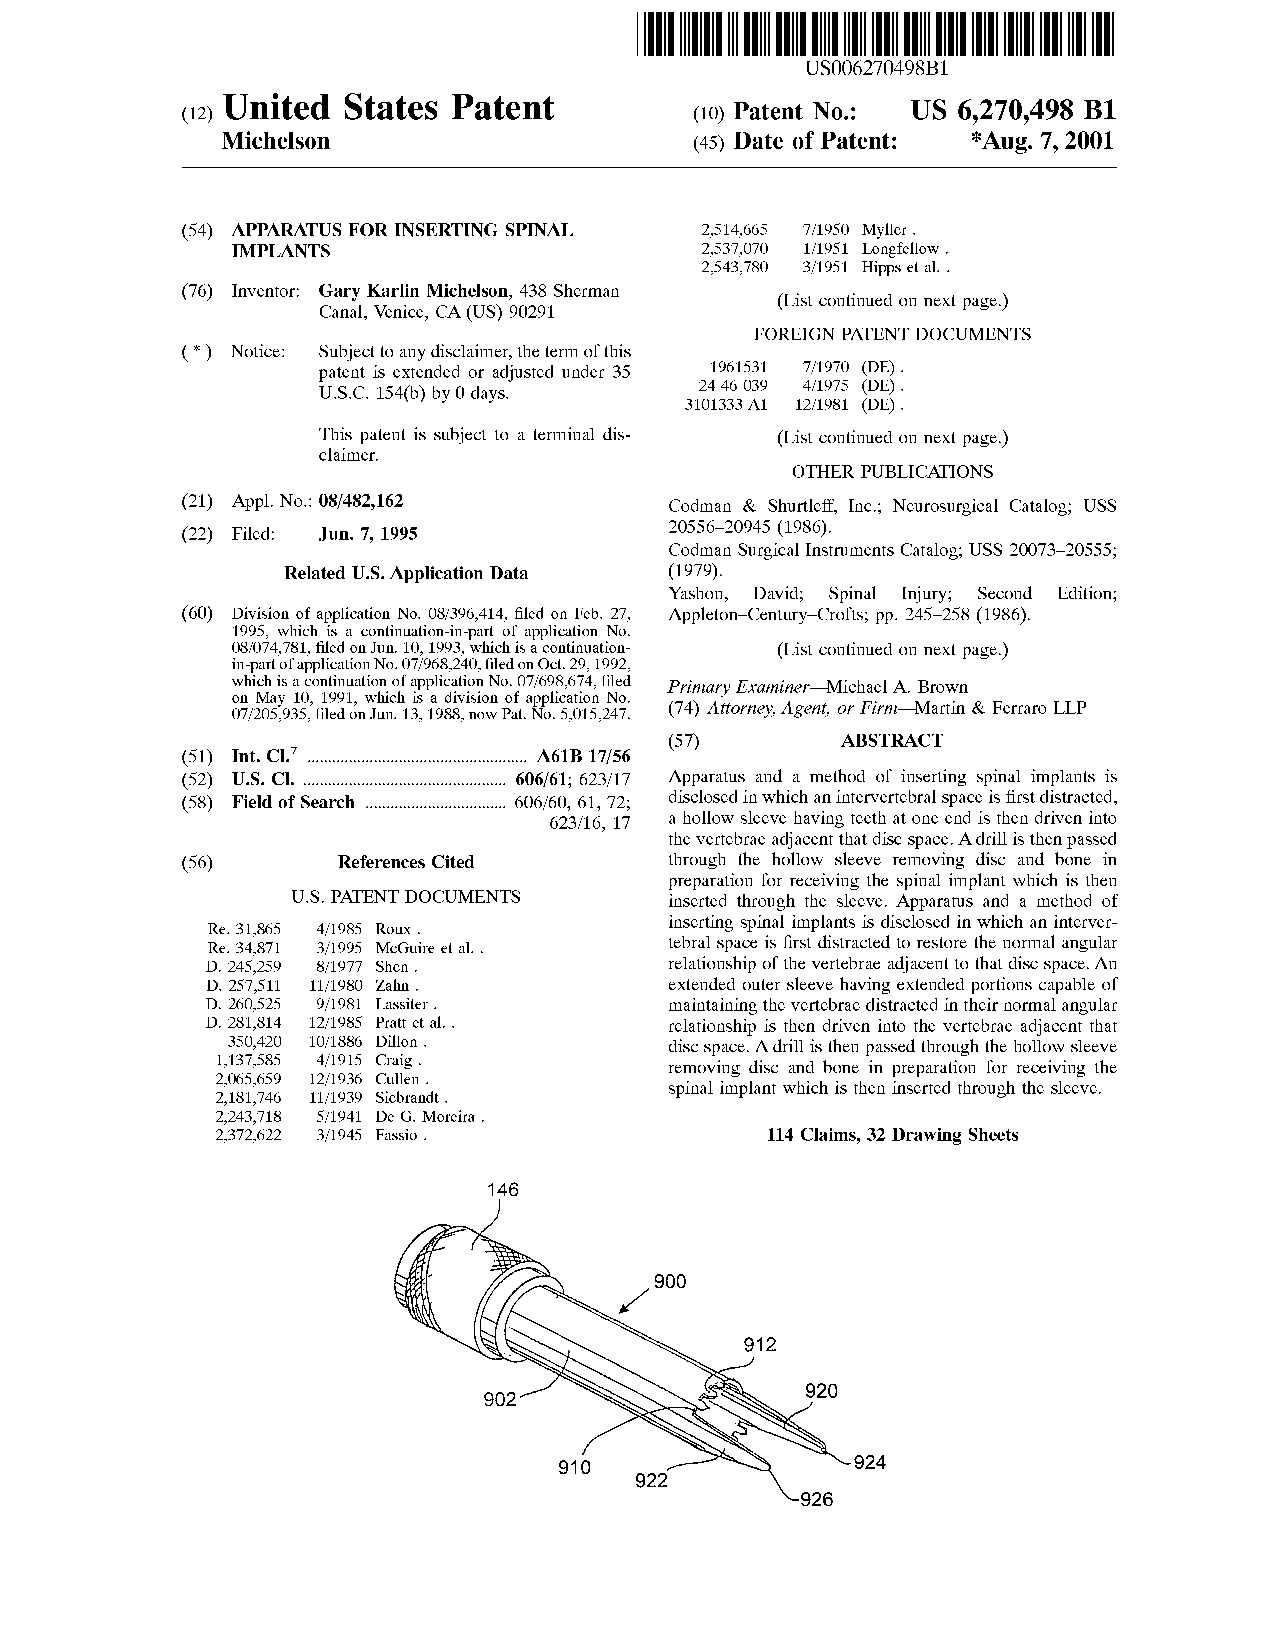 Apparatus for inserting spinal implants - Patent 6,270,498